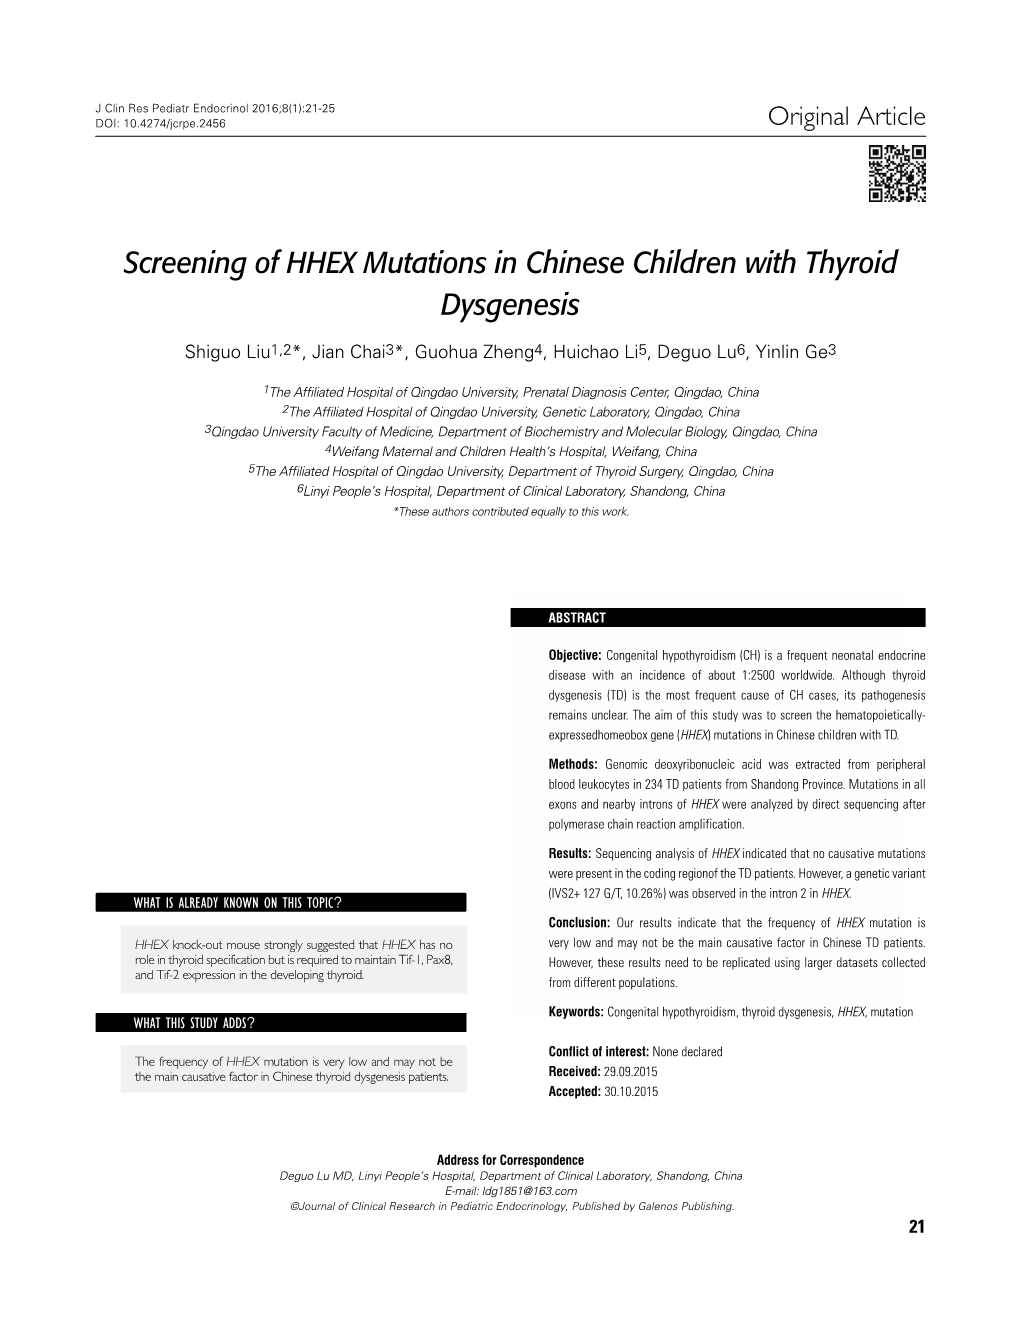 Screening of HHEX Mutations in Chinese Children with Thyroid Dysgenesis